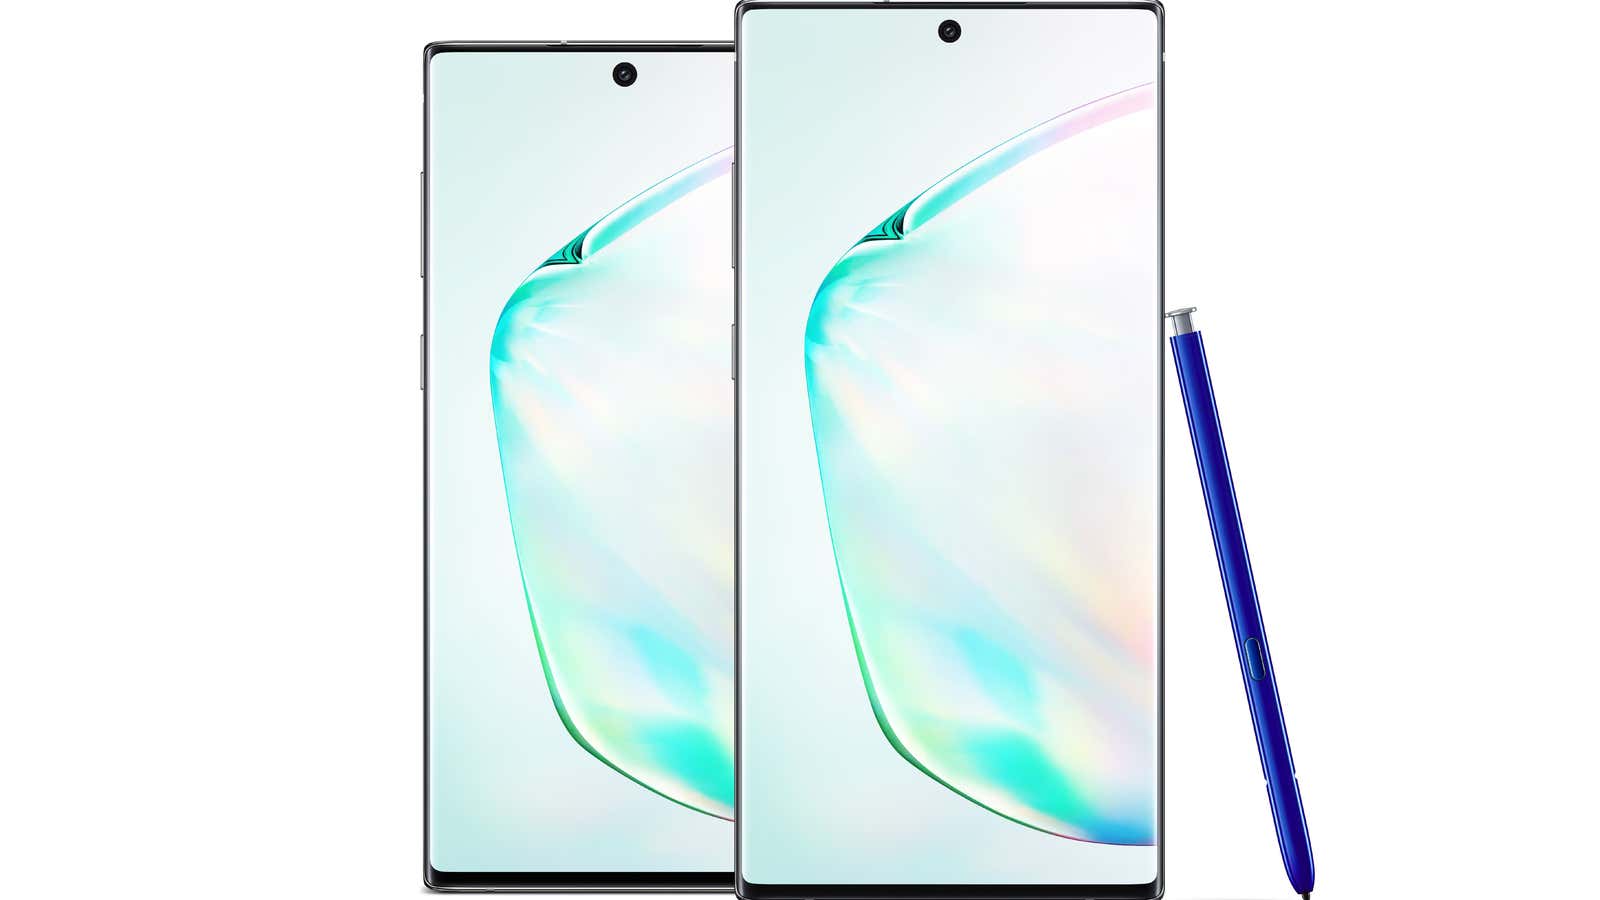 The new Samsung Note 10 and 10+.